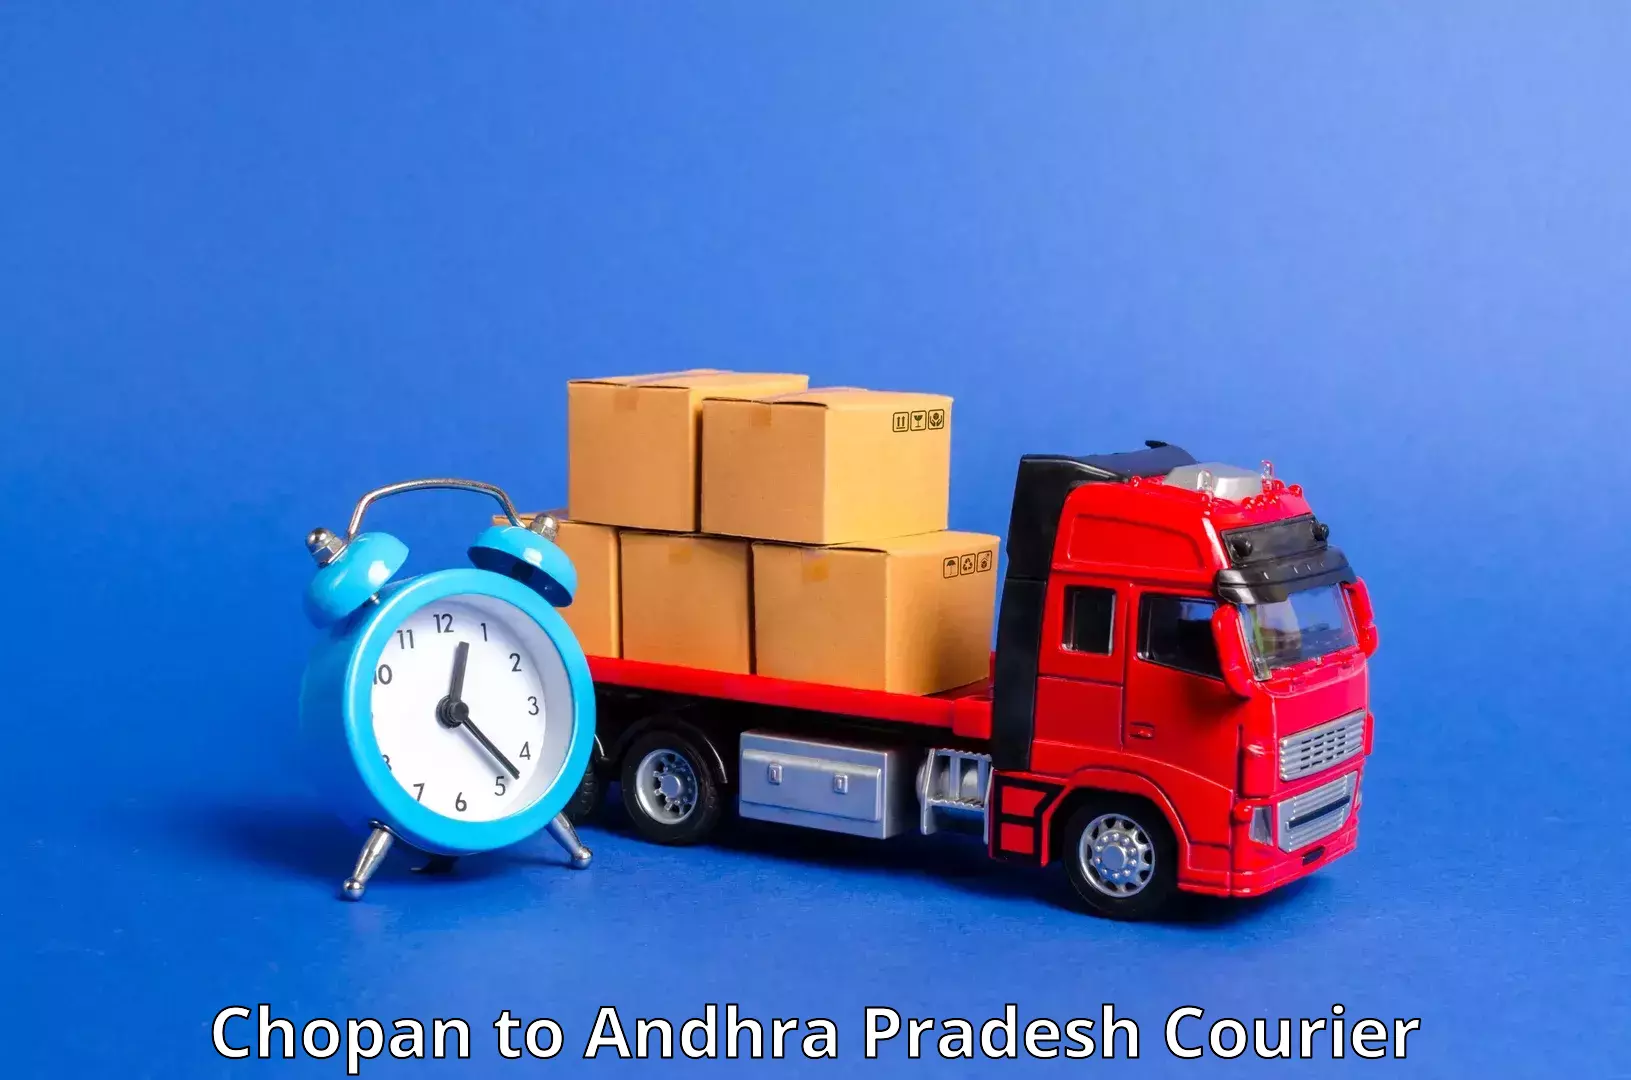 State-of-the-art courier technology Chopan to Chitrada